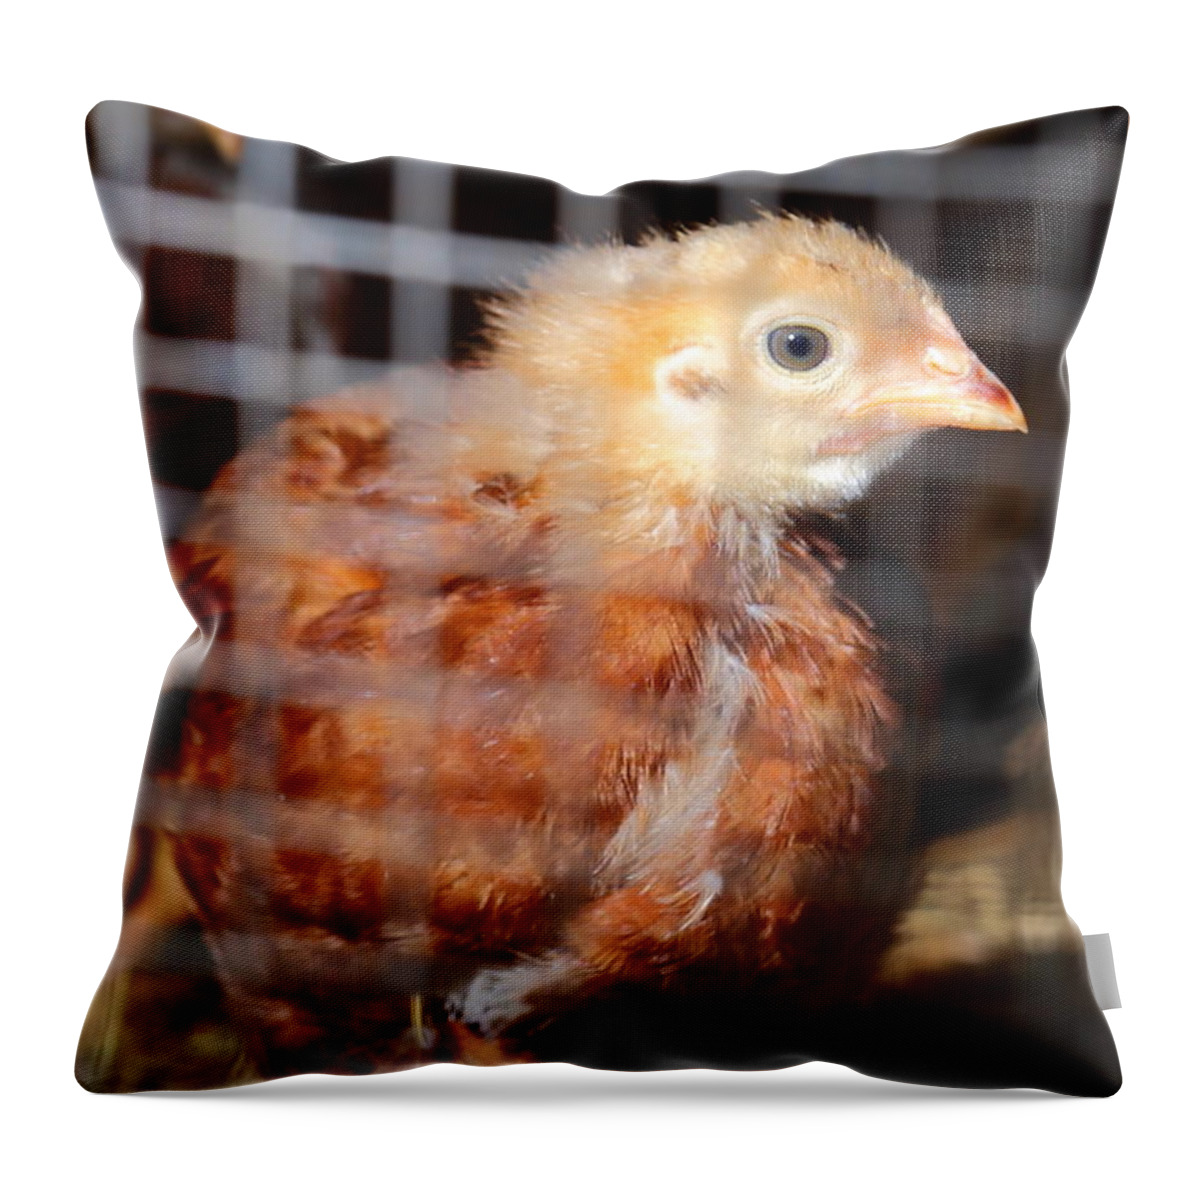 Chicken Throw Pillow featuring the photograph Rhode Island Red Chick At Five Weeks by Daniel Reed